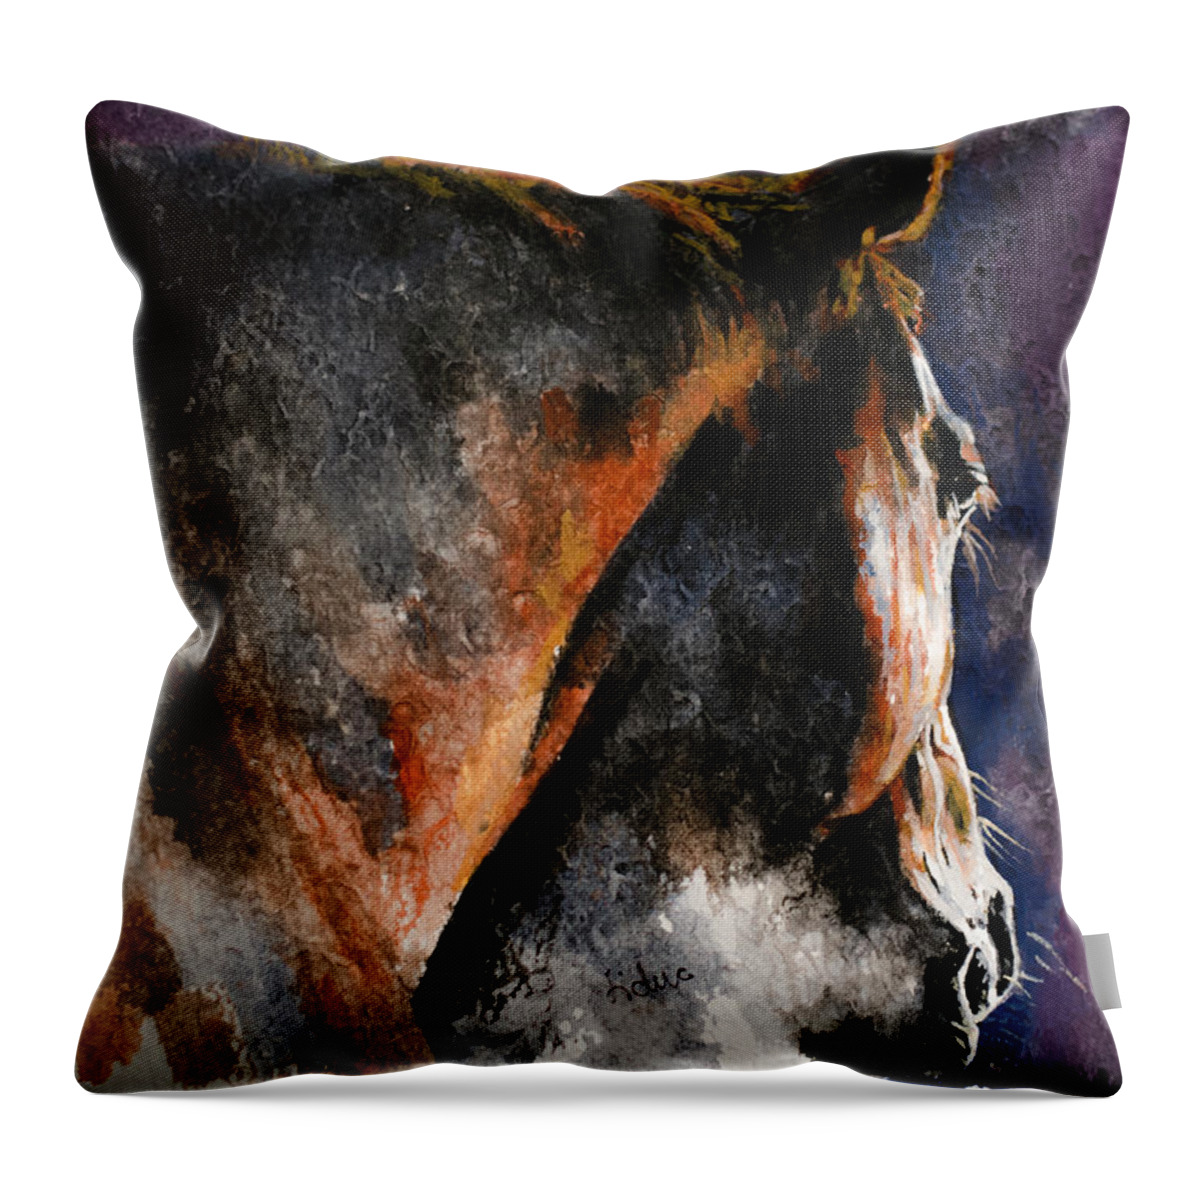 Horse Throw Pillow featuring the painting Cold Sunrise by Laur Iduc